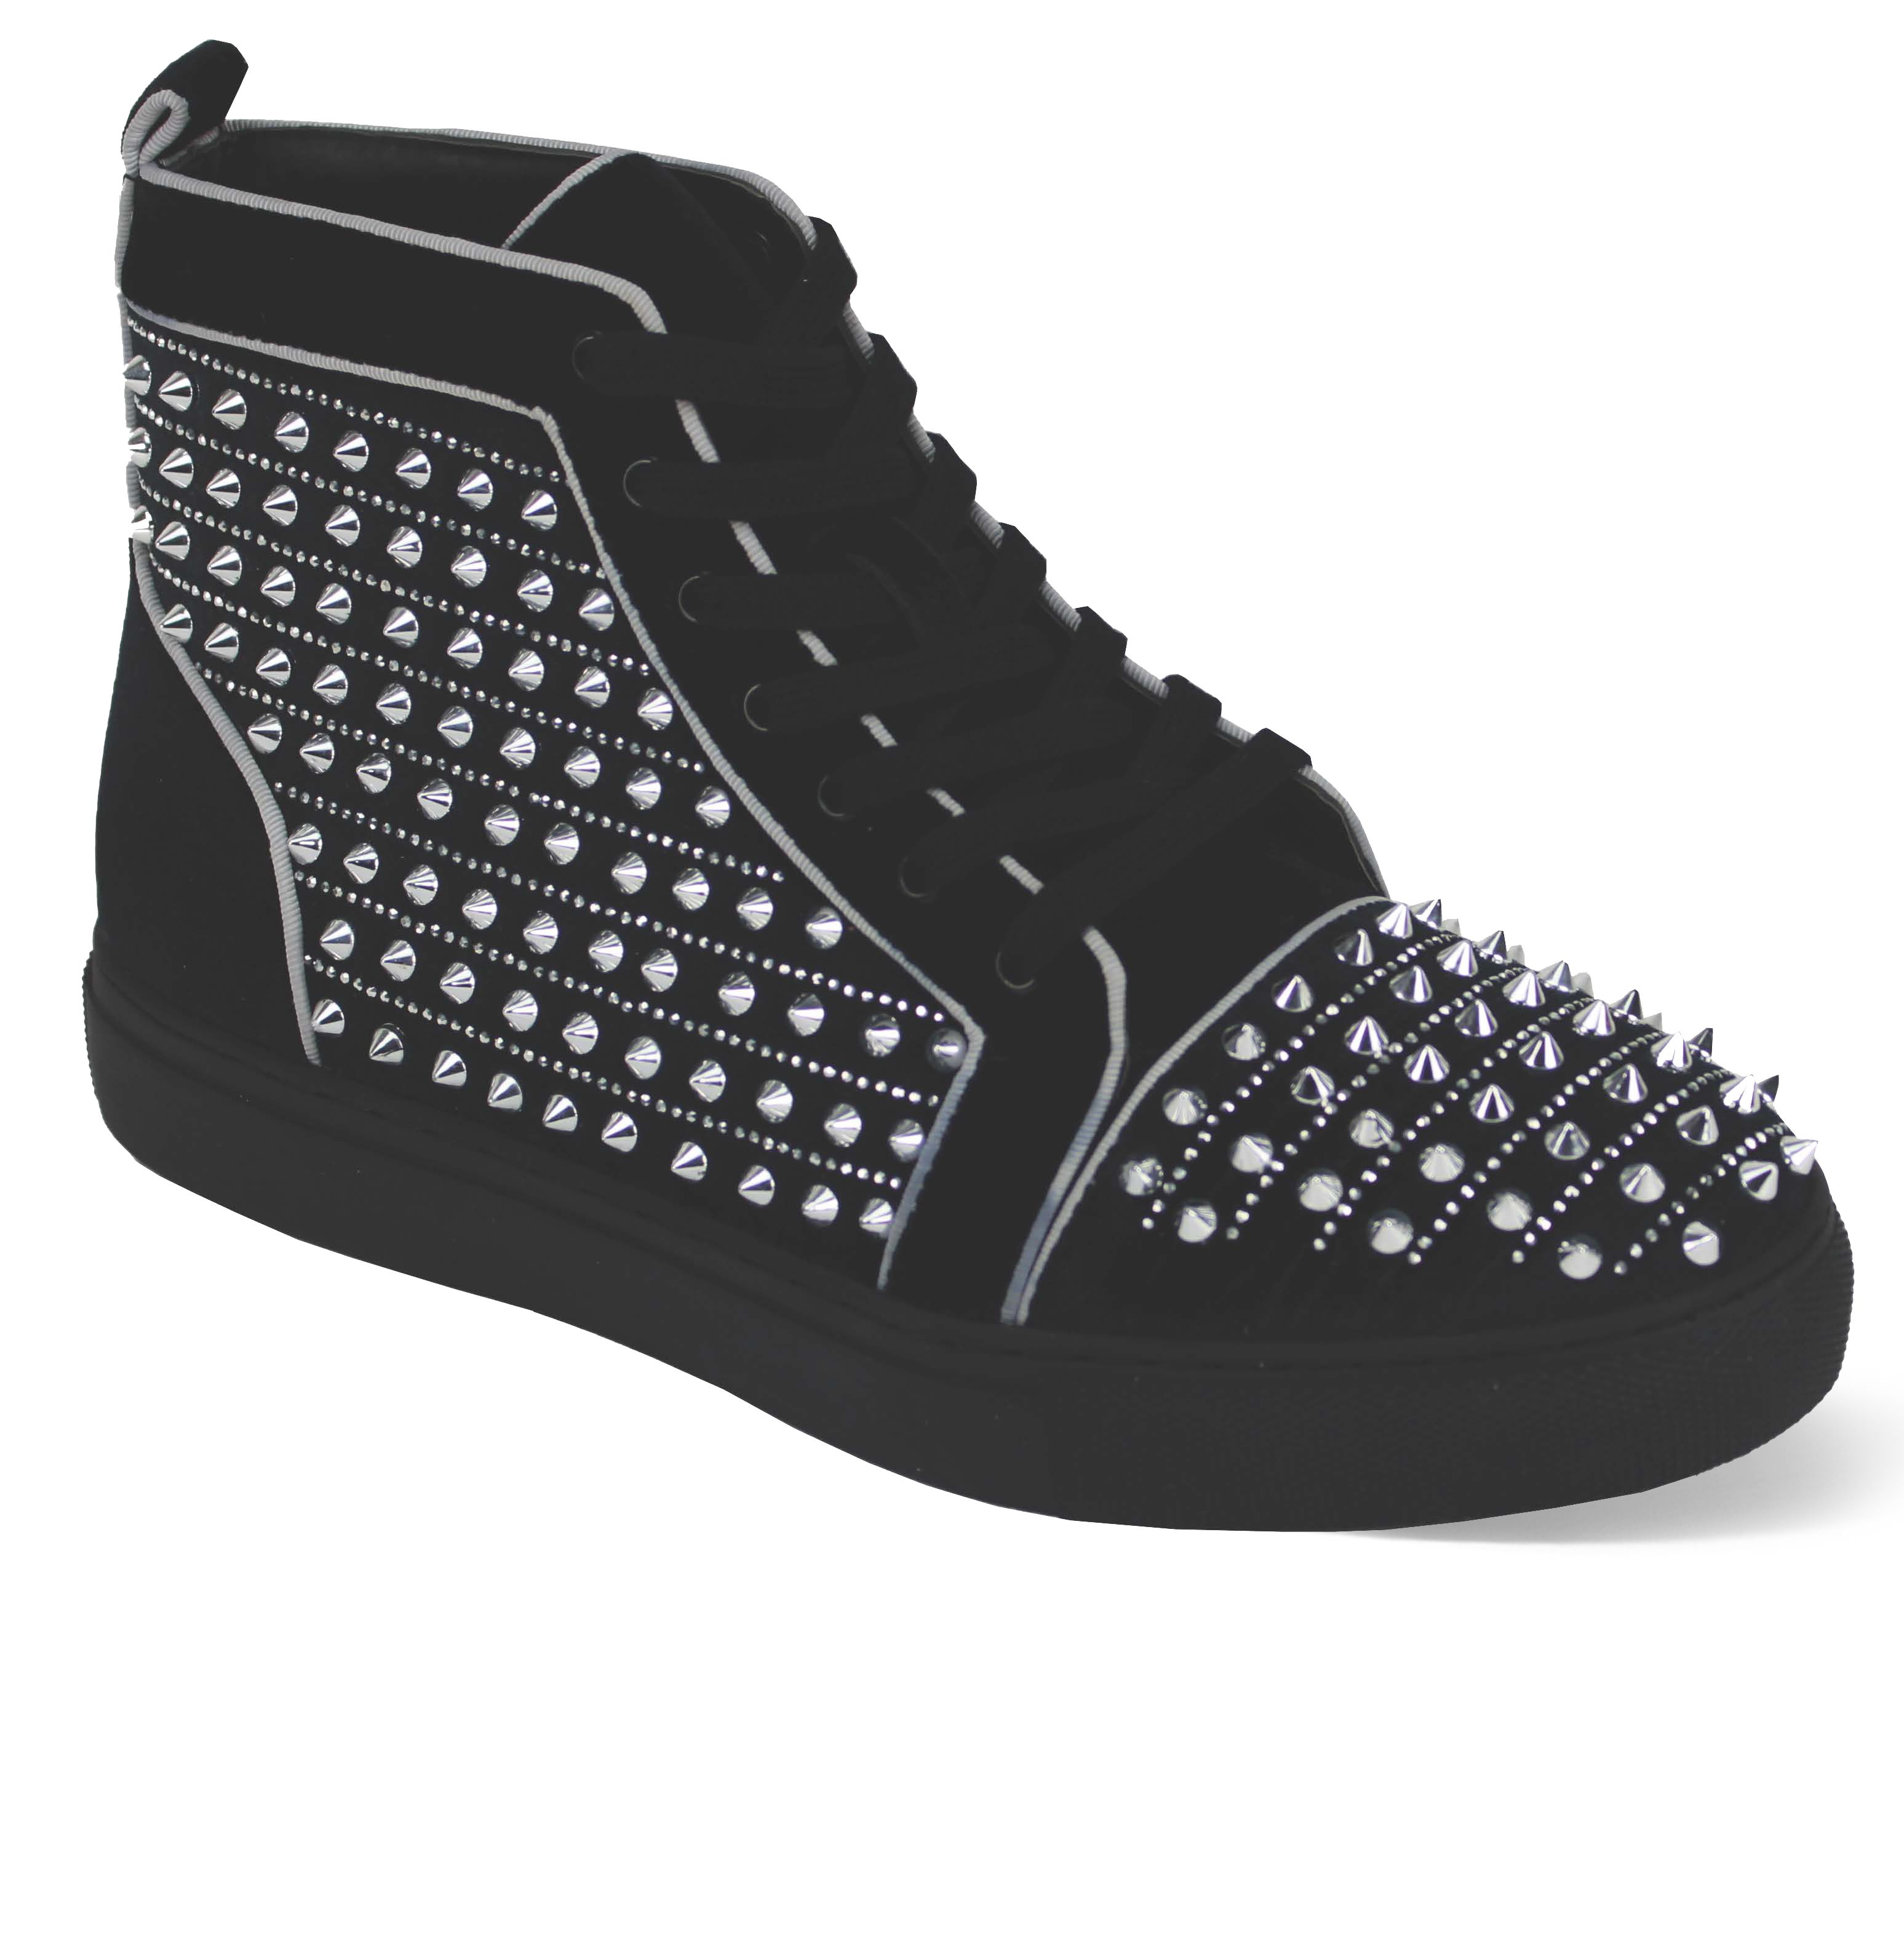 After Midnight Men's Outlet Fashion Boot - Spikes and Studs